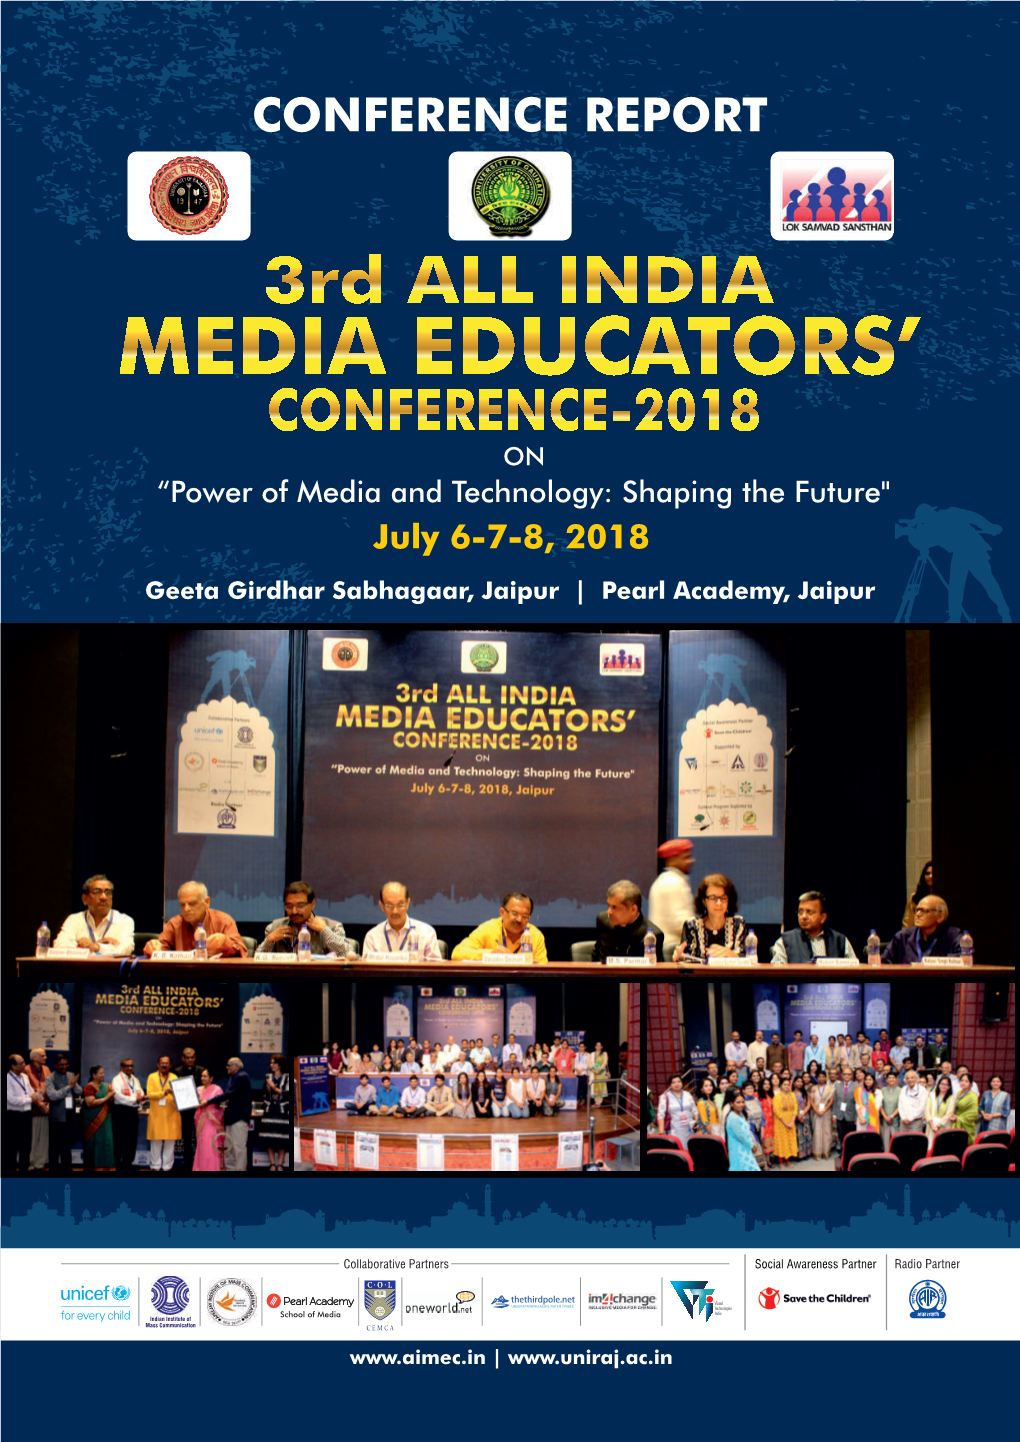 3Rd All India Media Educators' Conference-2018 on Power of Media and Technology: Shaping the Future